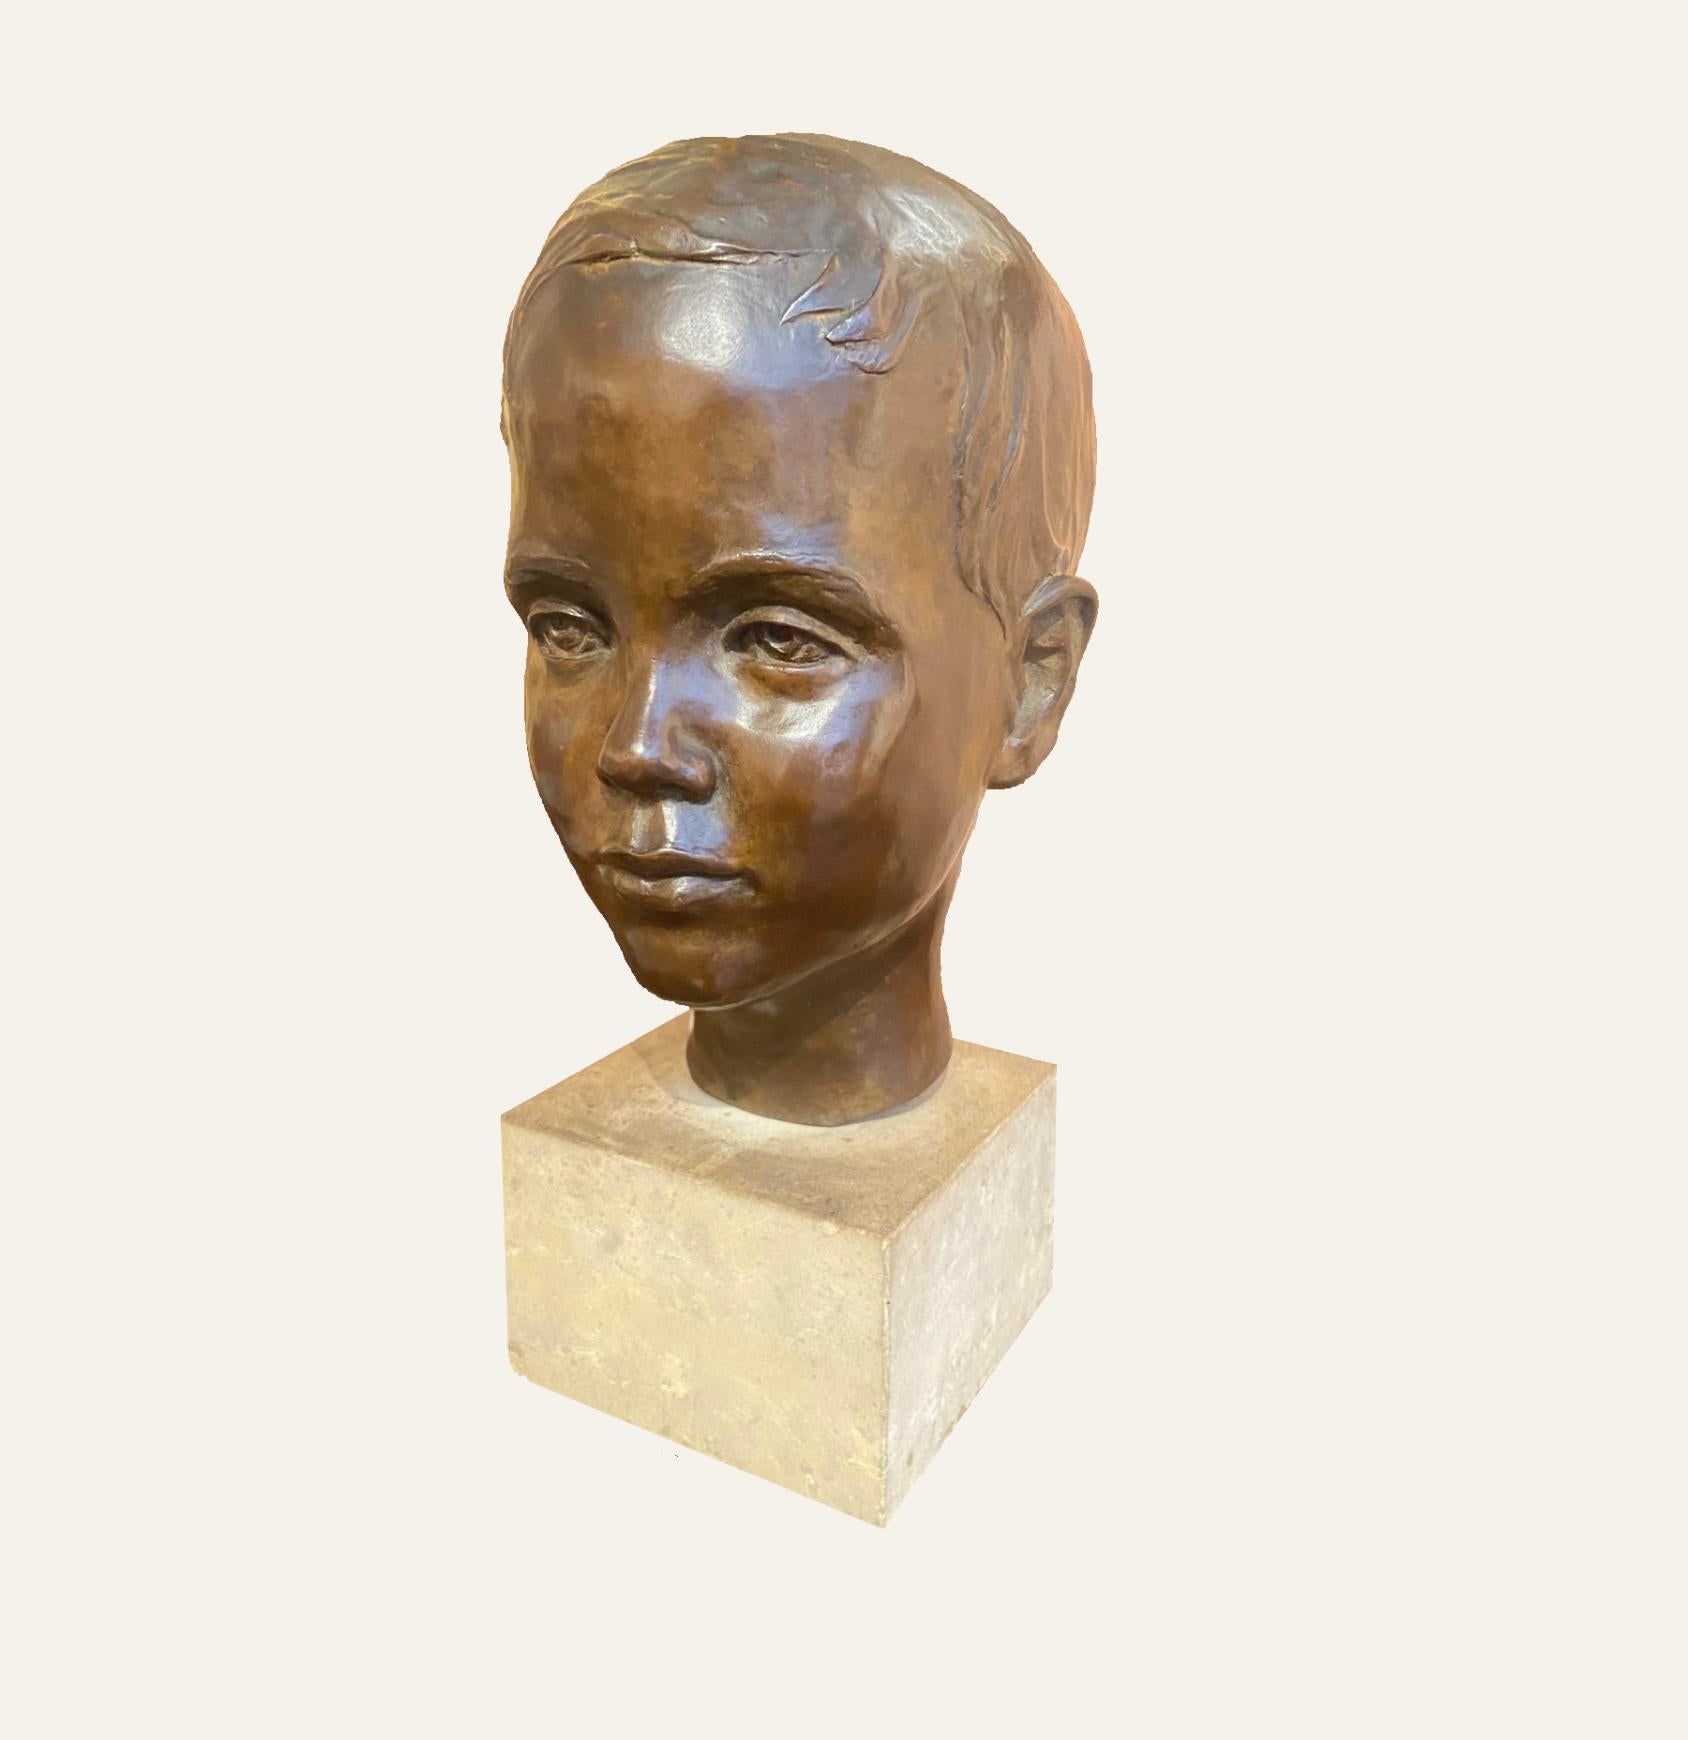 Early 20th Century English School Figurative Sculpture - Bronze Head of a Young Boy, Early 20th Century English Sculpture